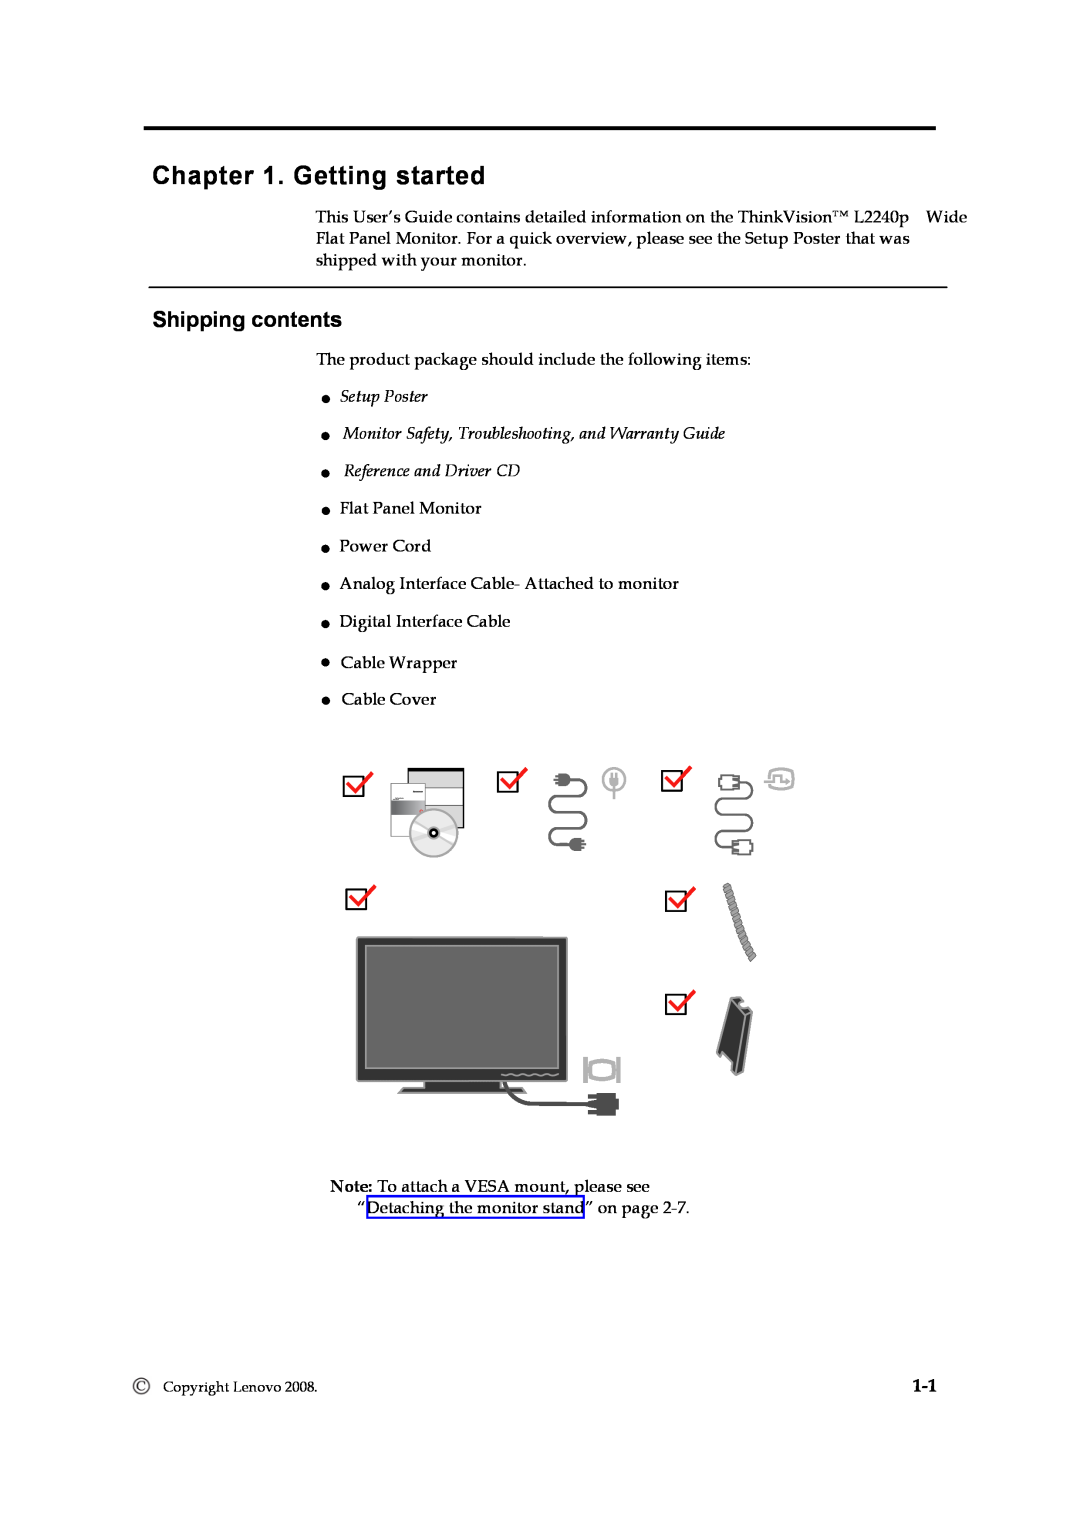 Lenovo L2240p manual Getting started, Shipping contents, Setup Poster, Reference and Driver CD 